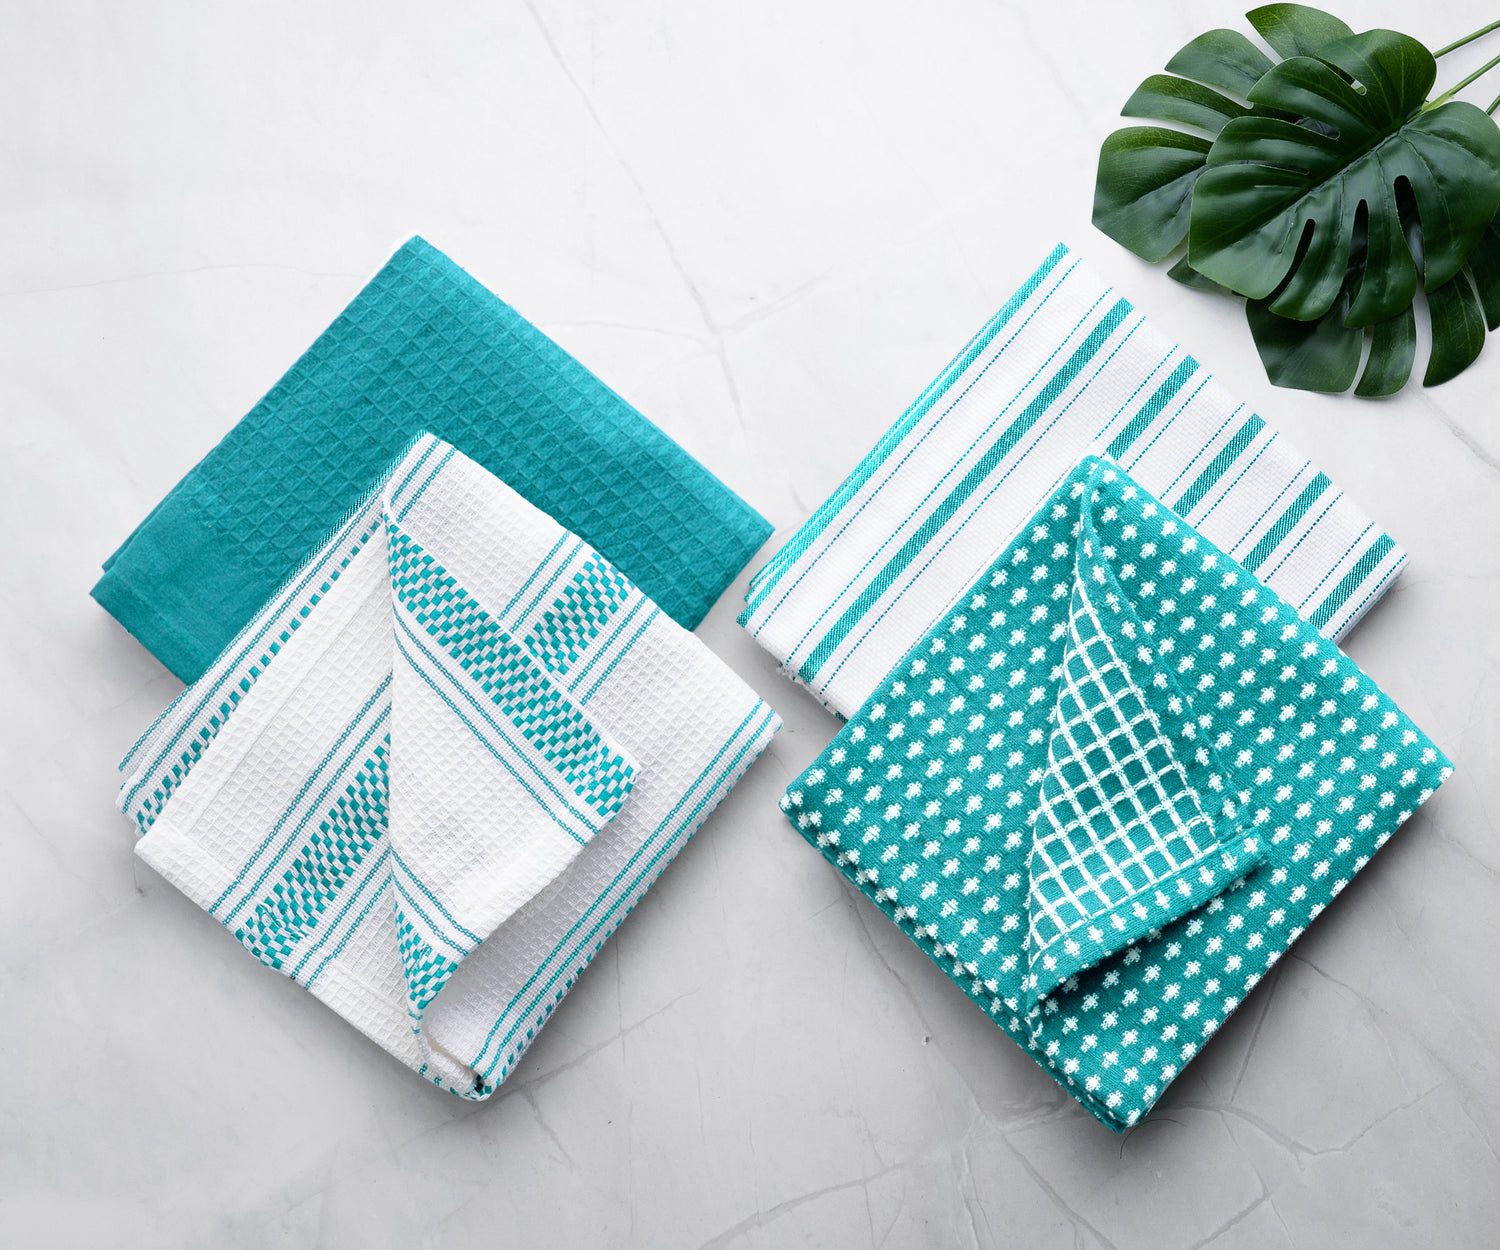 The 10 Best Dish Towels of 2023, According to Experts